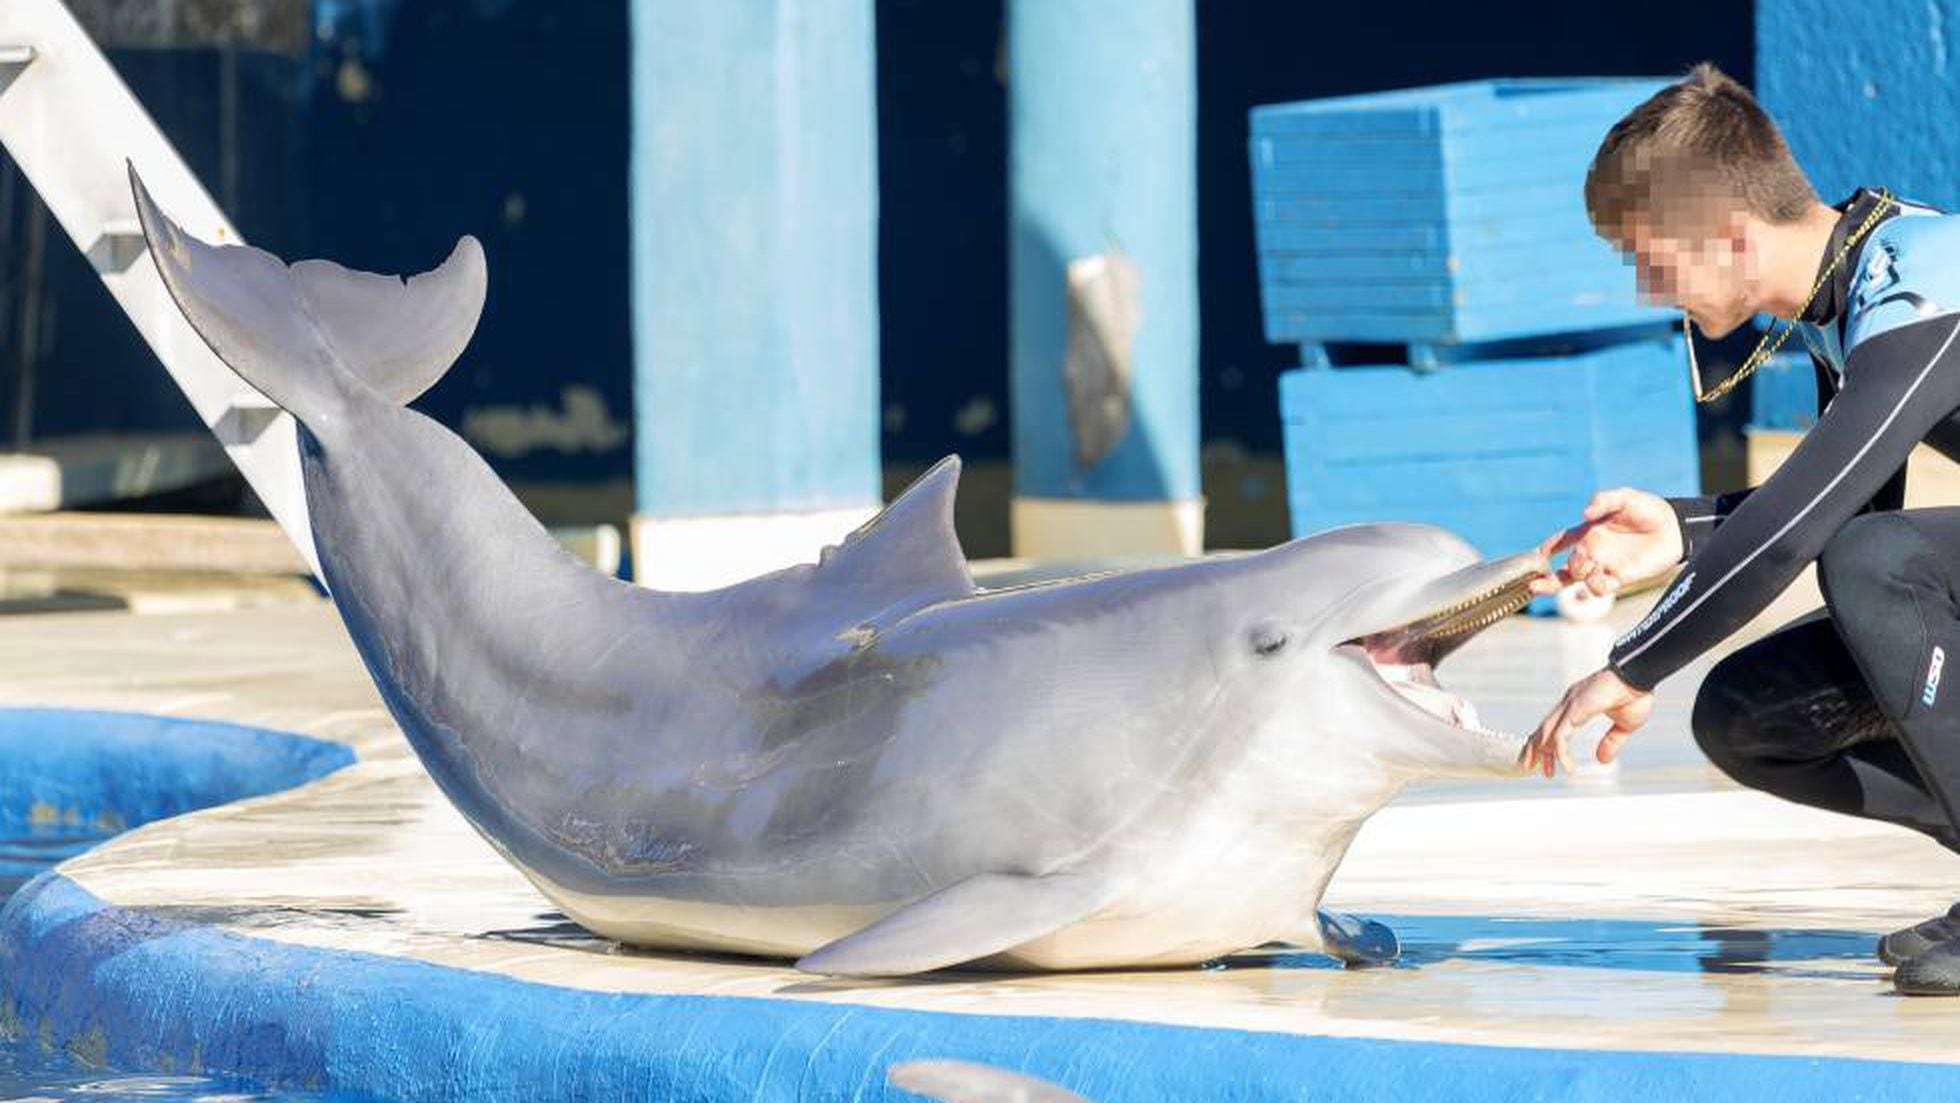 Animal cruelty in Spain: Complaint claims abusive conditions for dolphins  at Madrid Zoo | Spain | EL PAÍS English Edition